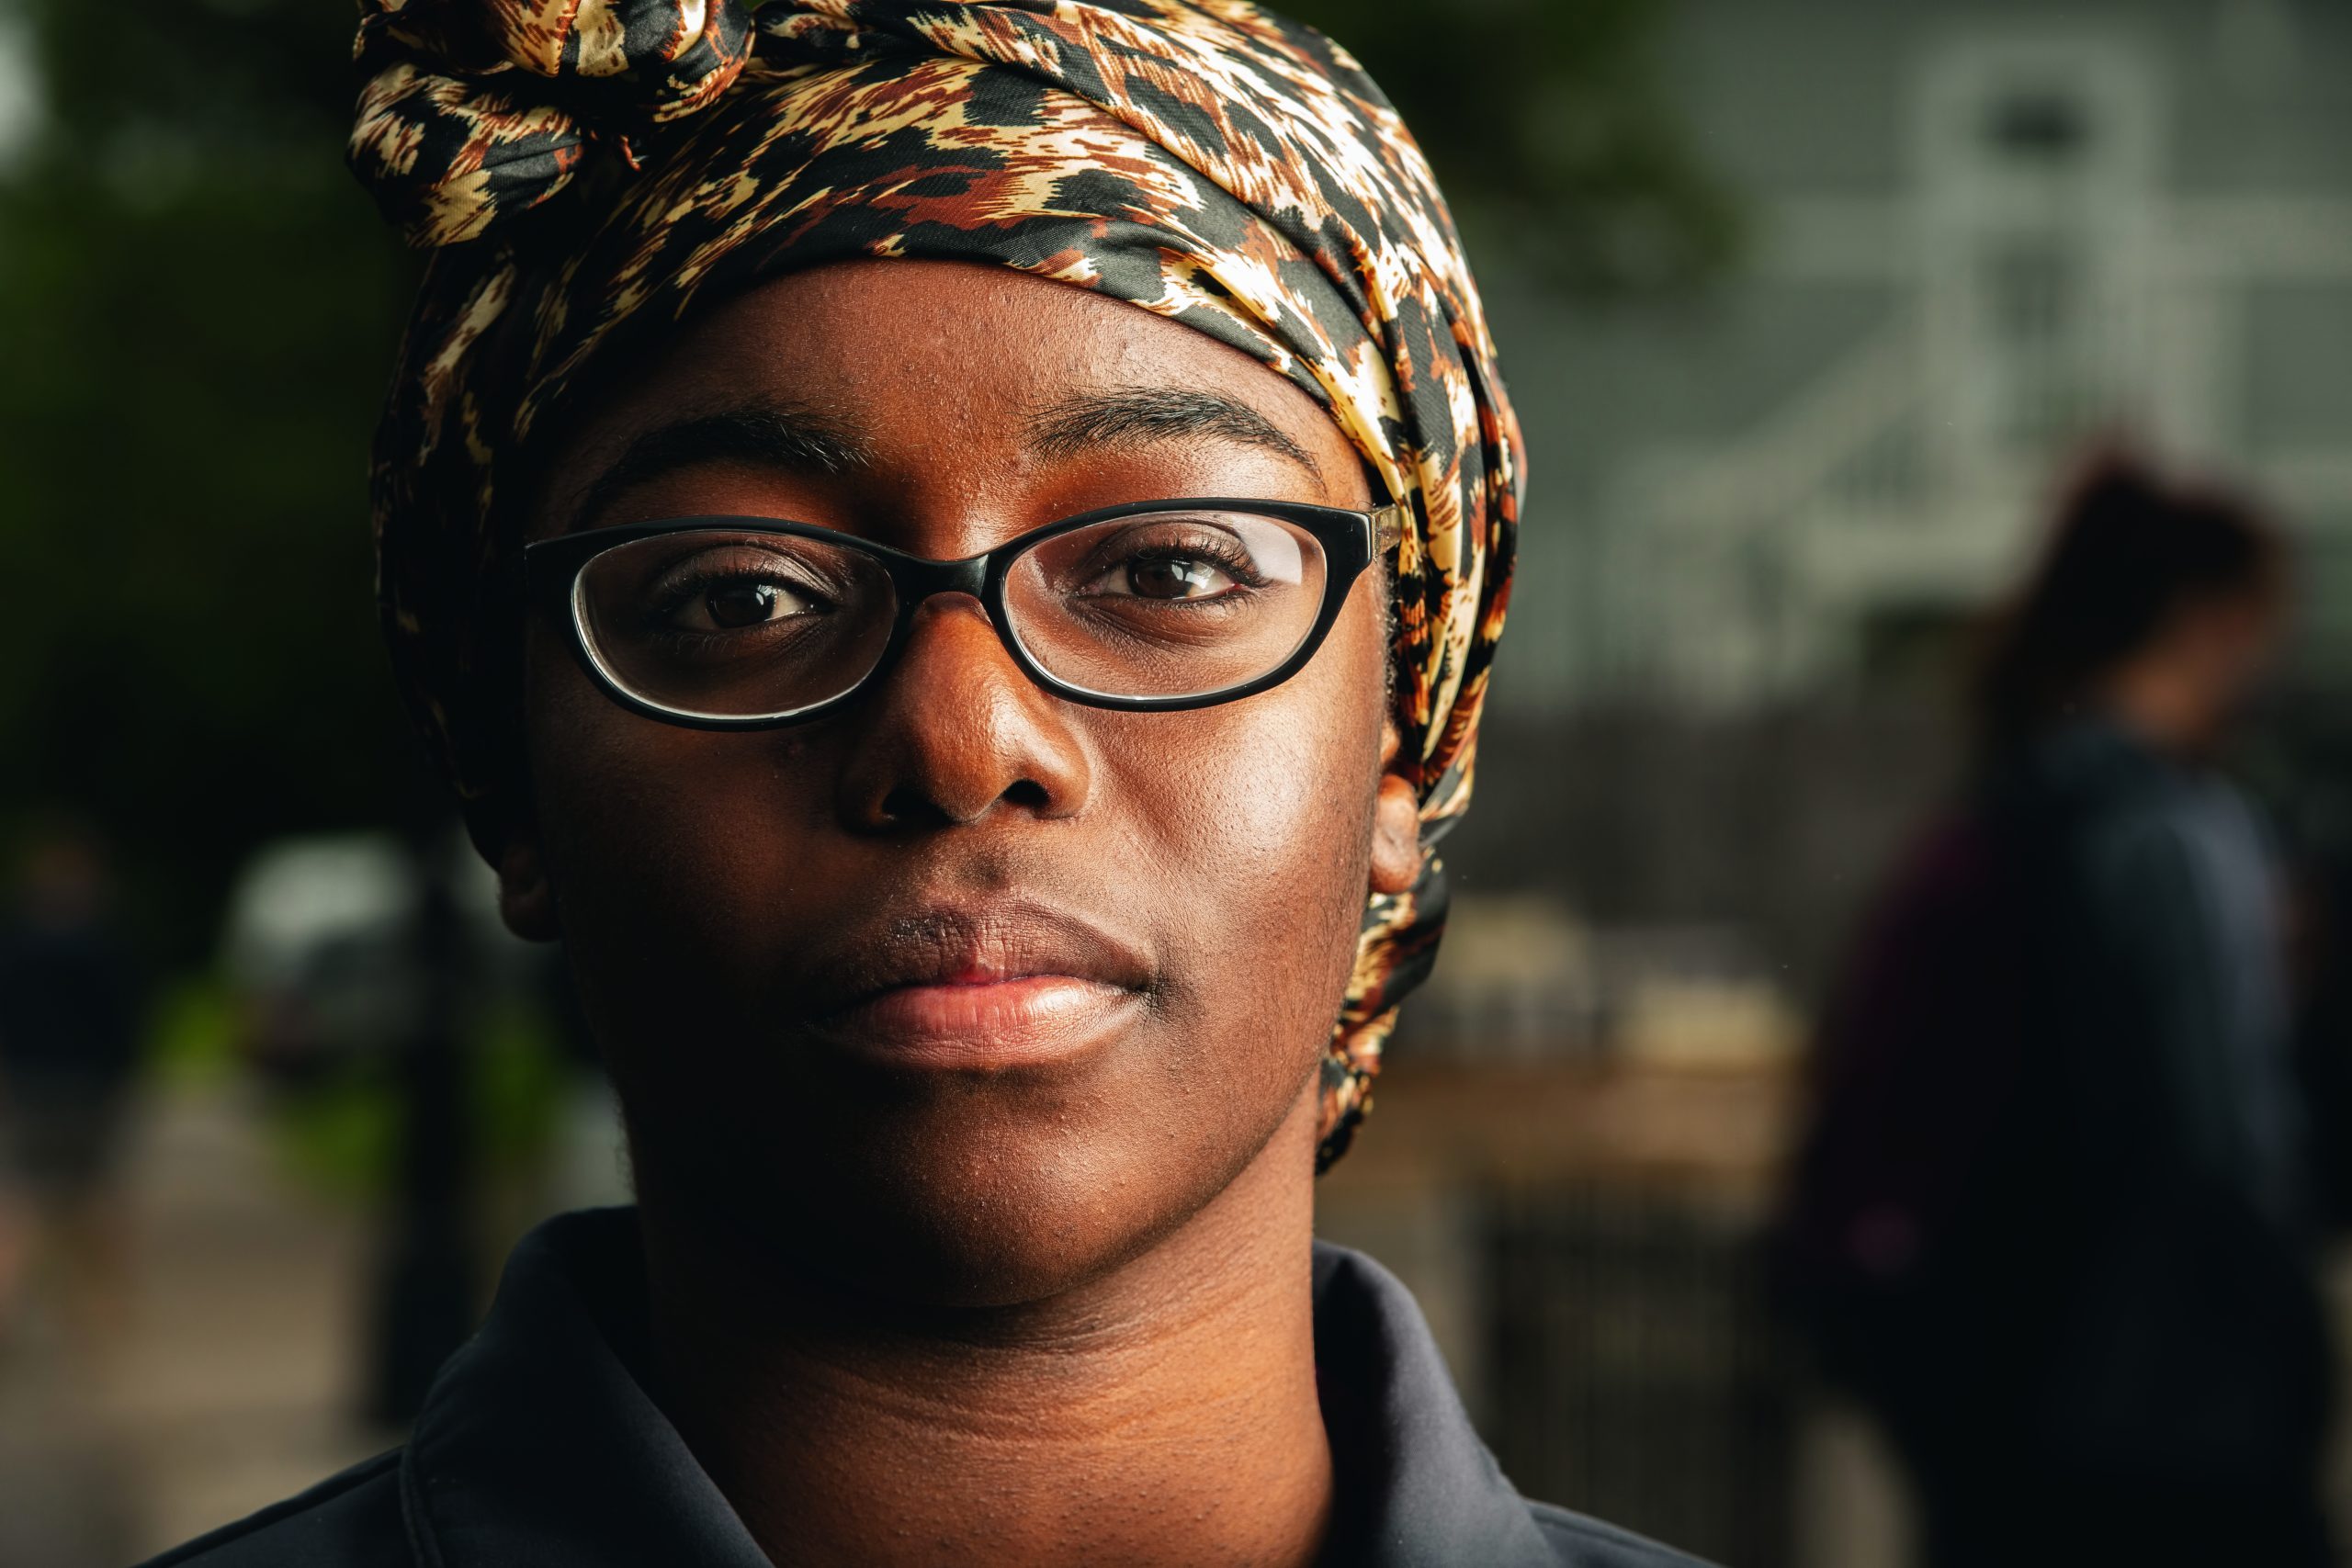 A Black woman wearing eyeglasses with a colorful scarf covering her hair